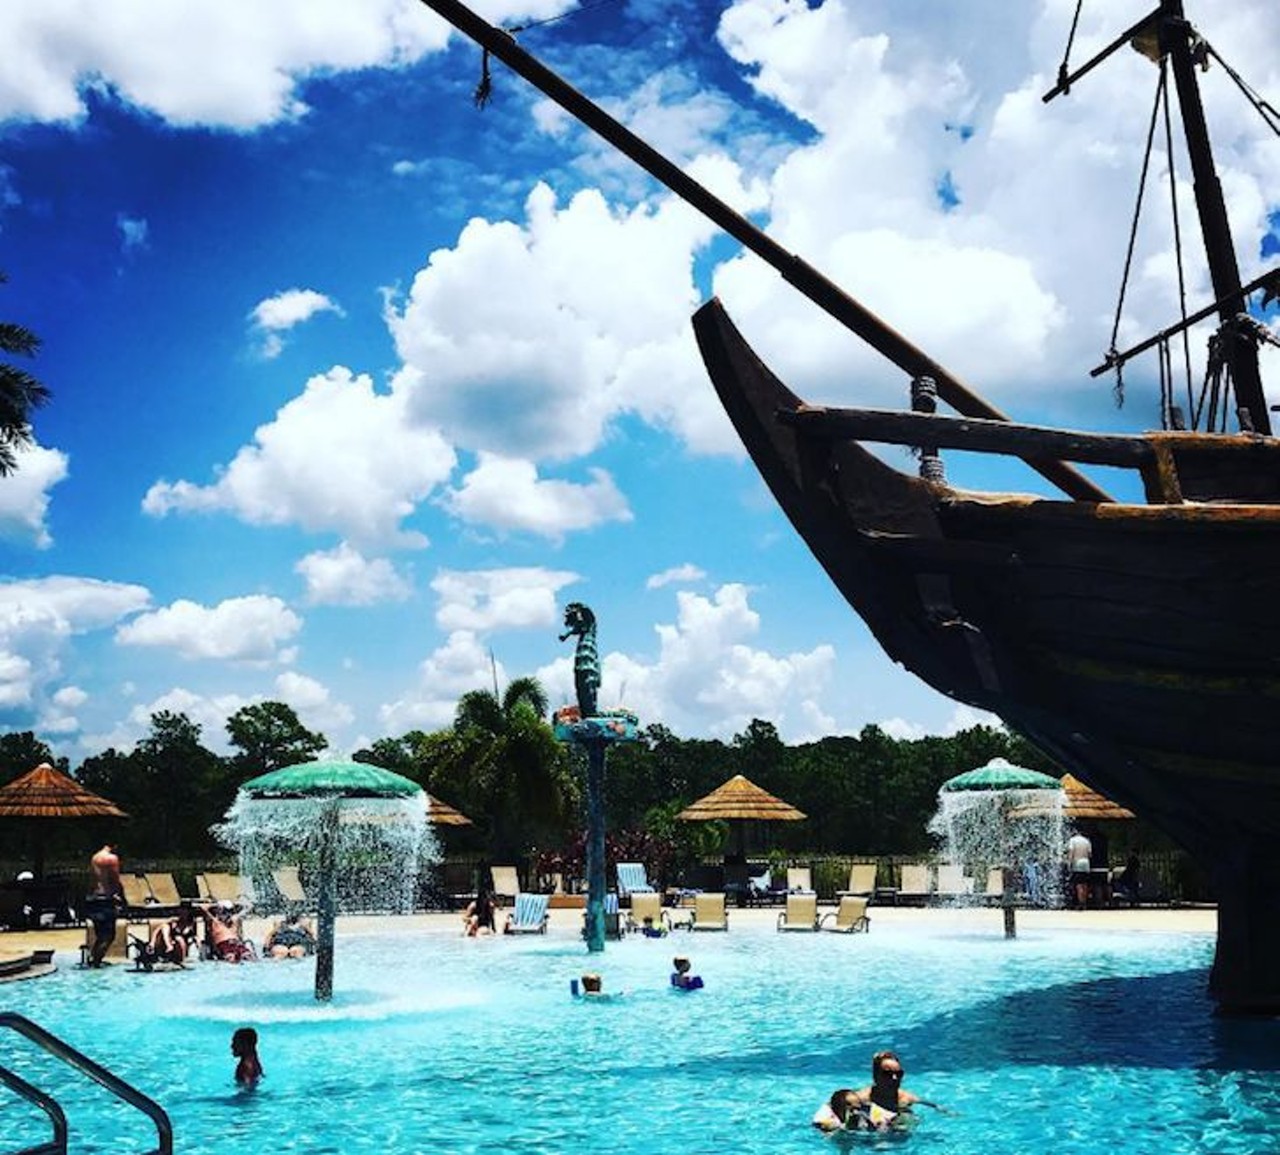 Lake Buena Vista Resort Village & Spa 
8113 Resort Village Drive | 407-597-0214 | 8 a.m. - 10 p.m.
Swimming beside a pirate ship may be a dream of yours. If so, you&#146;ll be happy to hear that Lake Buena Vista features a Pirate&#146;s Plunge Pool, along with its Relaxation Pool. The Pirate Shipwreck that sits in the pool has shooting water cannons, a water slide, hot tubs, tumbling waterfalls, poolside loungers and hammocks. You can also grab a drink at Lani&#146;s Luau, the poolside tiki bar. Guests at the hotel can bring friends and family to use the pool as well.
Photo via lbvorlandoresort/Instagram